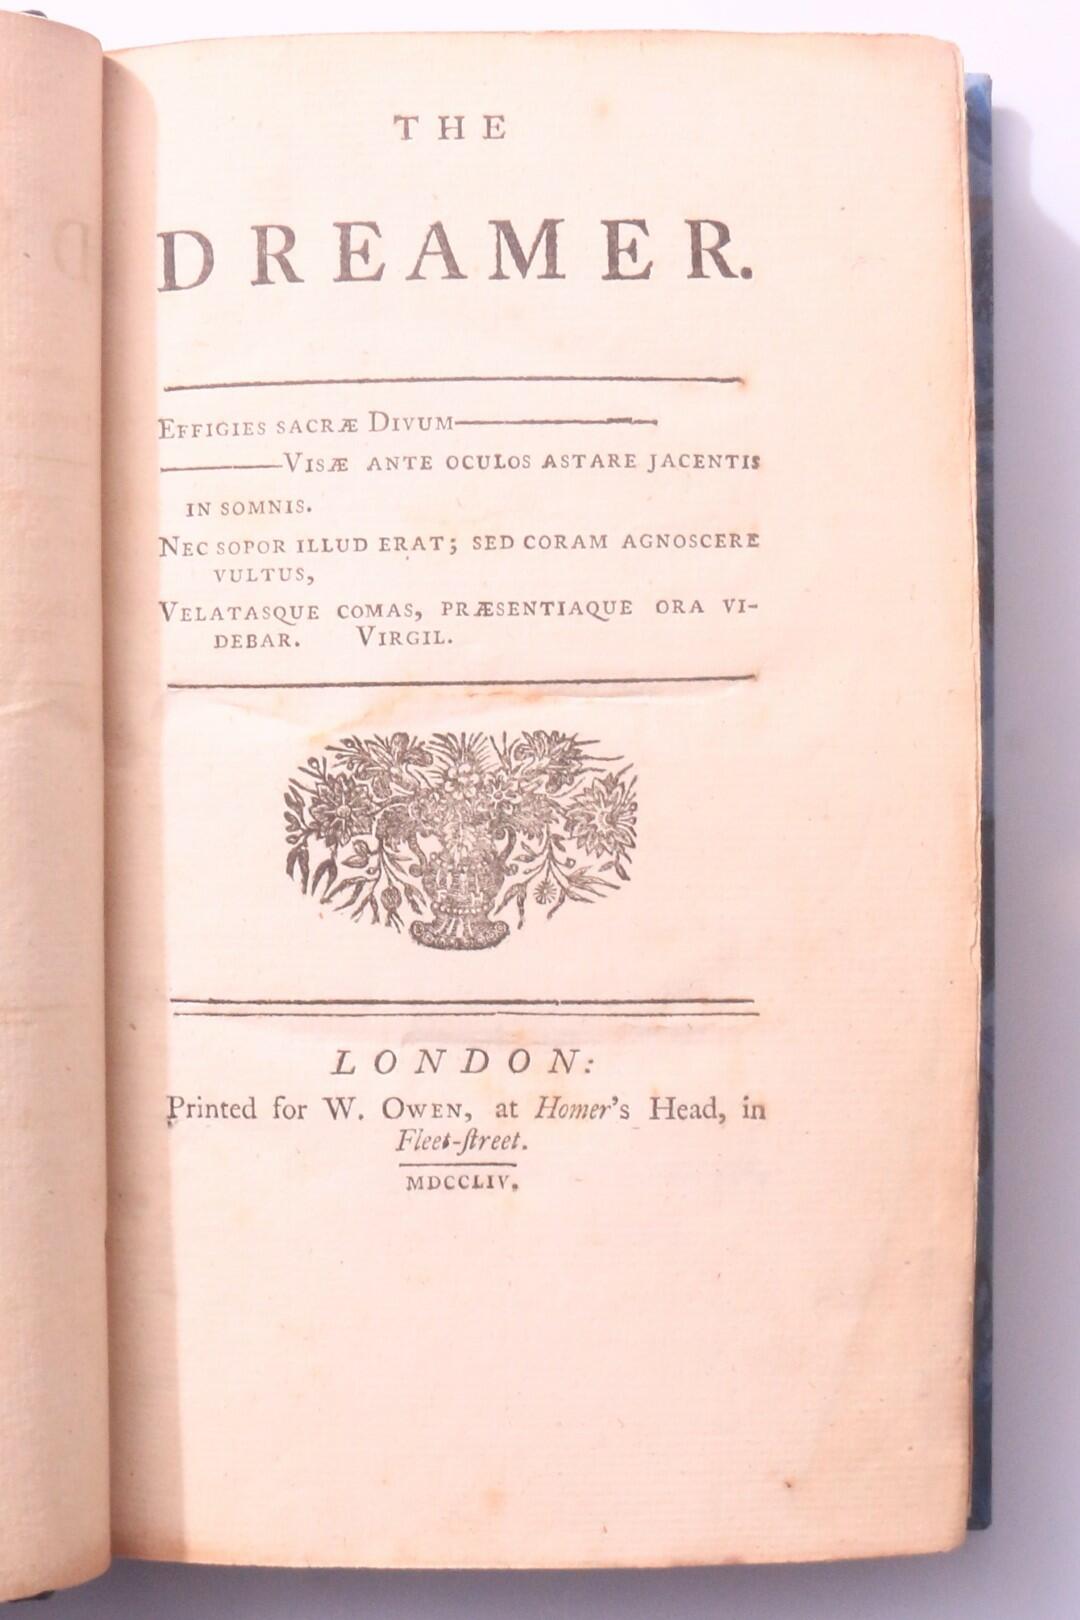 Anonymous [William King] - The Dreamer - W. Owen, 1754, First Edition.